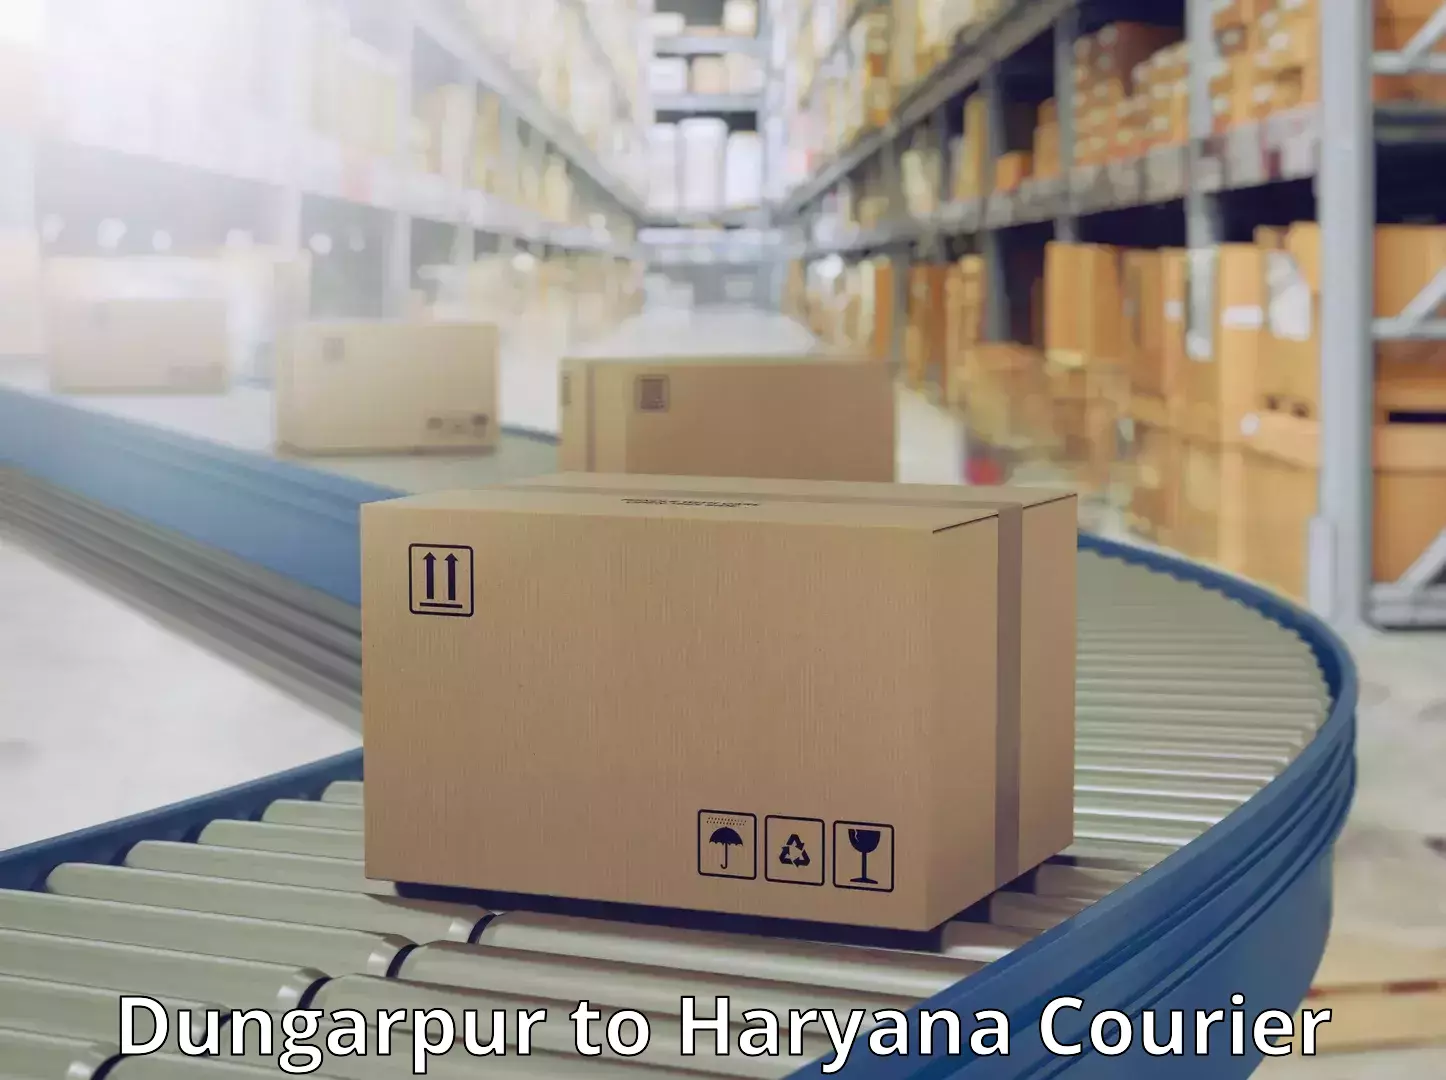 Secure freight services Dungarpur to Bilaspur Haryana